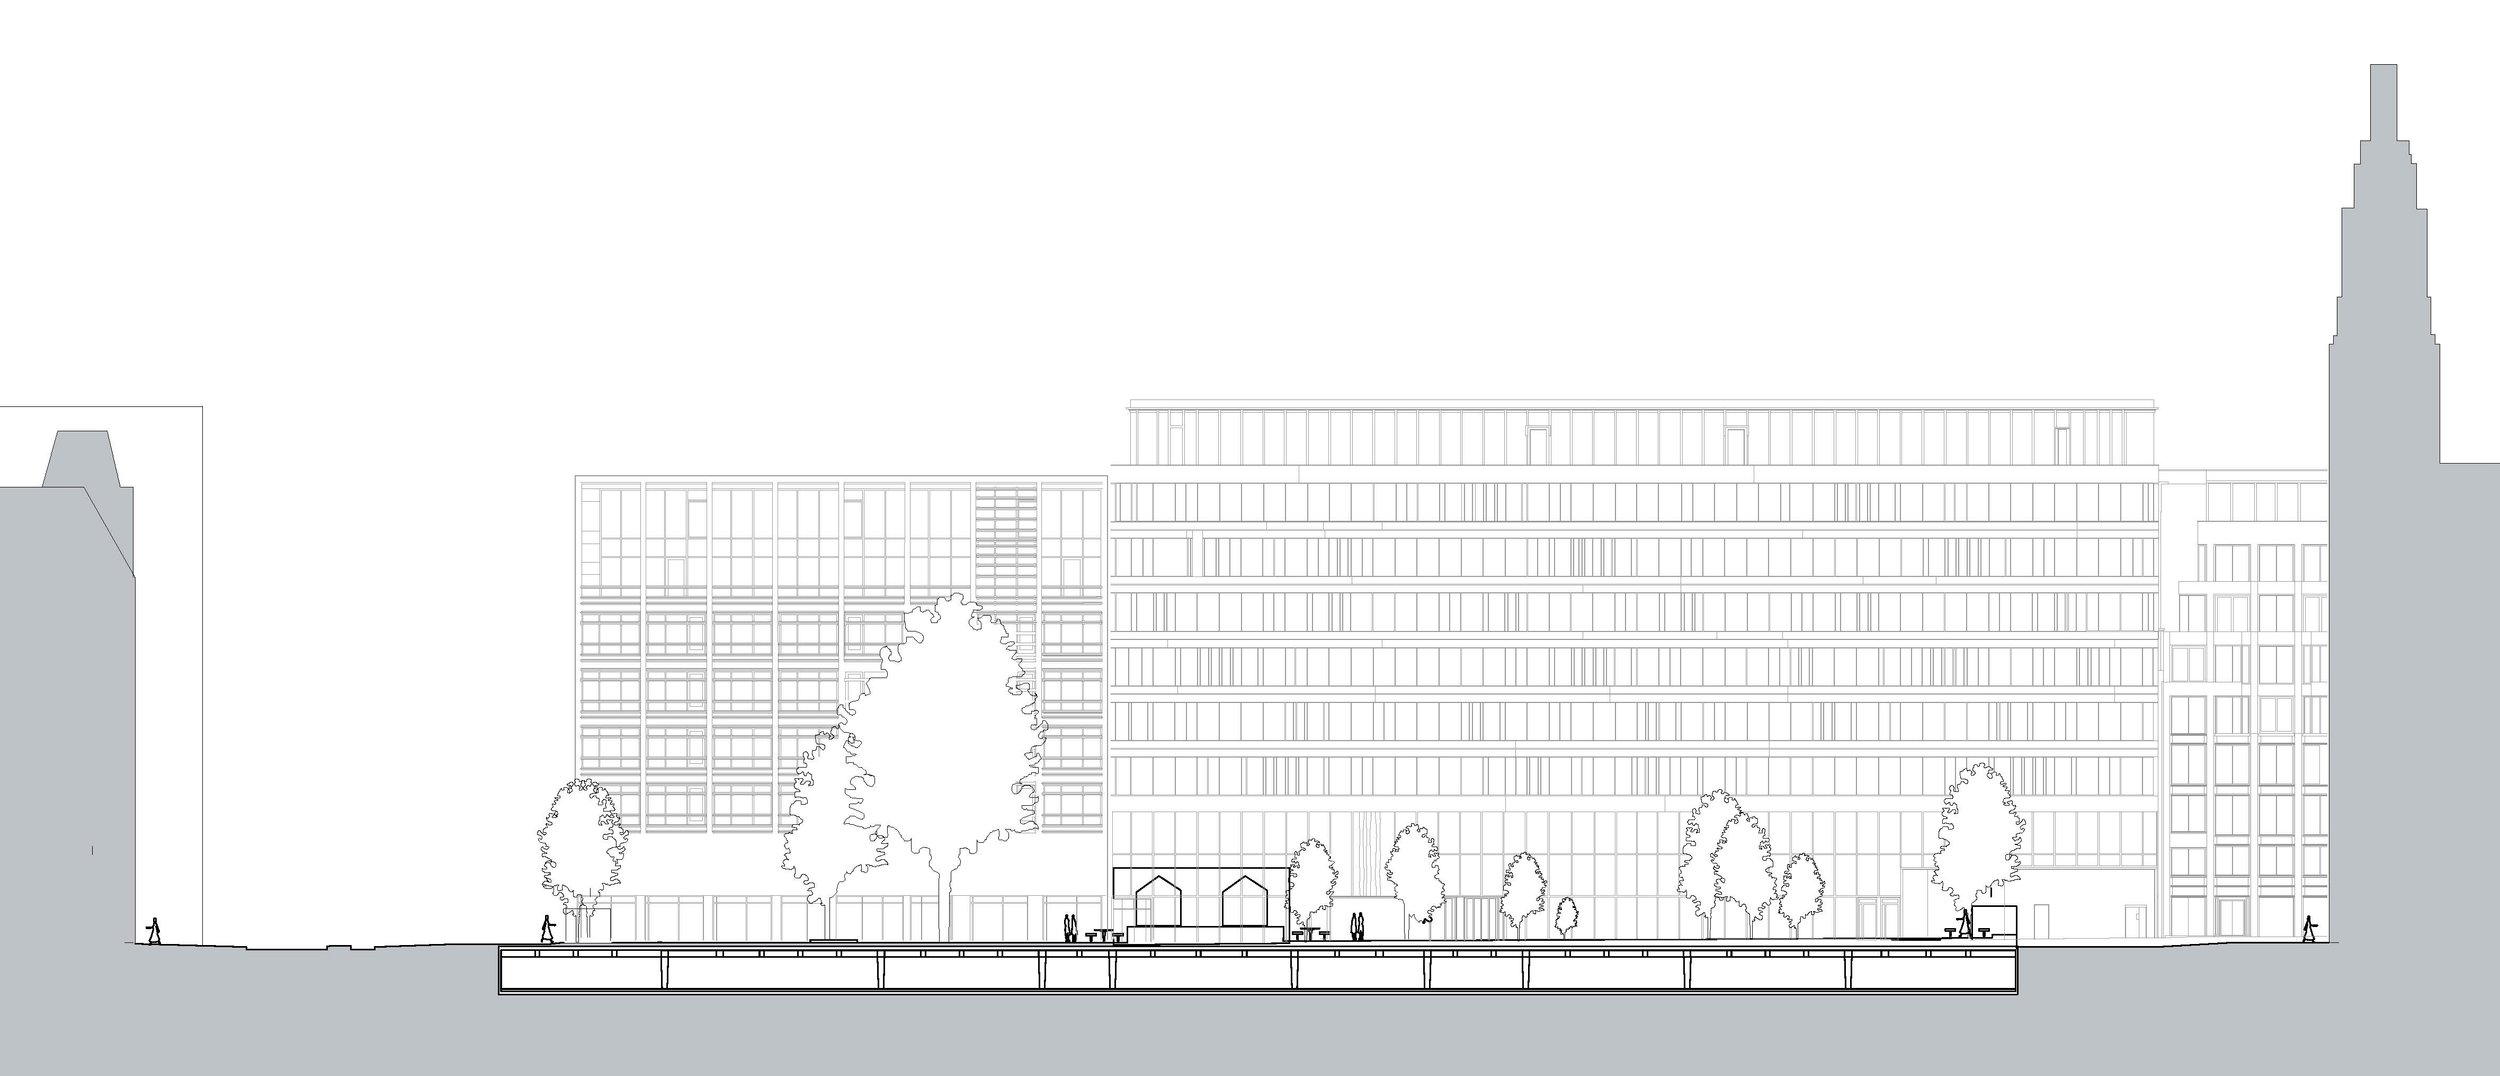 WOMO Architects London Finsbury Square Mixed-use Transformation Existing Section